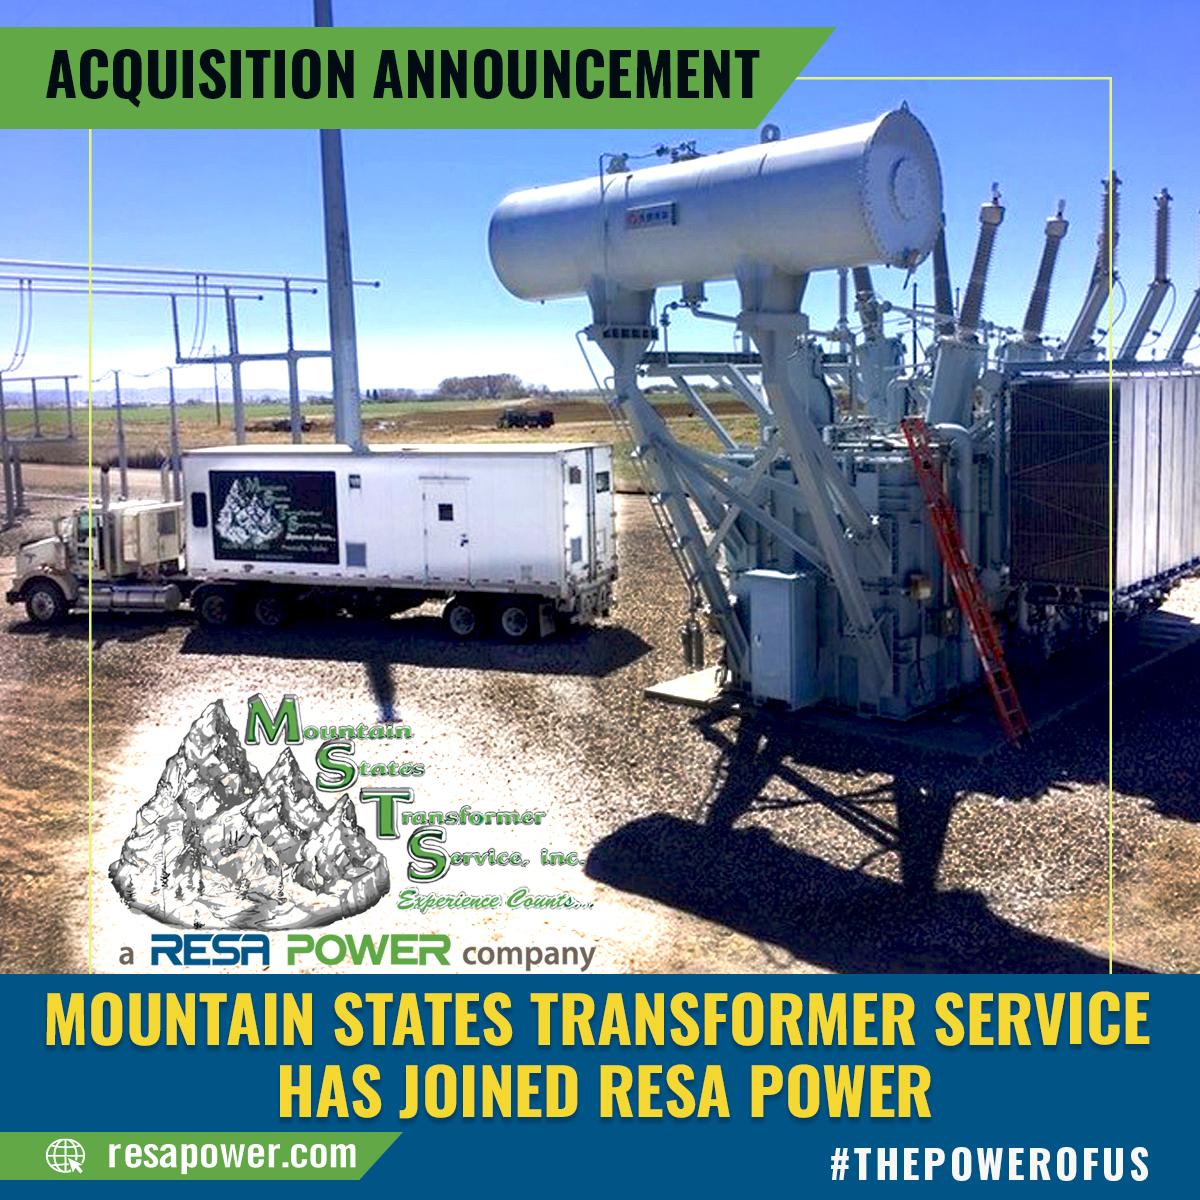 Mountain States Transformer Service has joined RESA Power